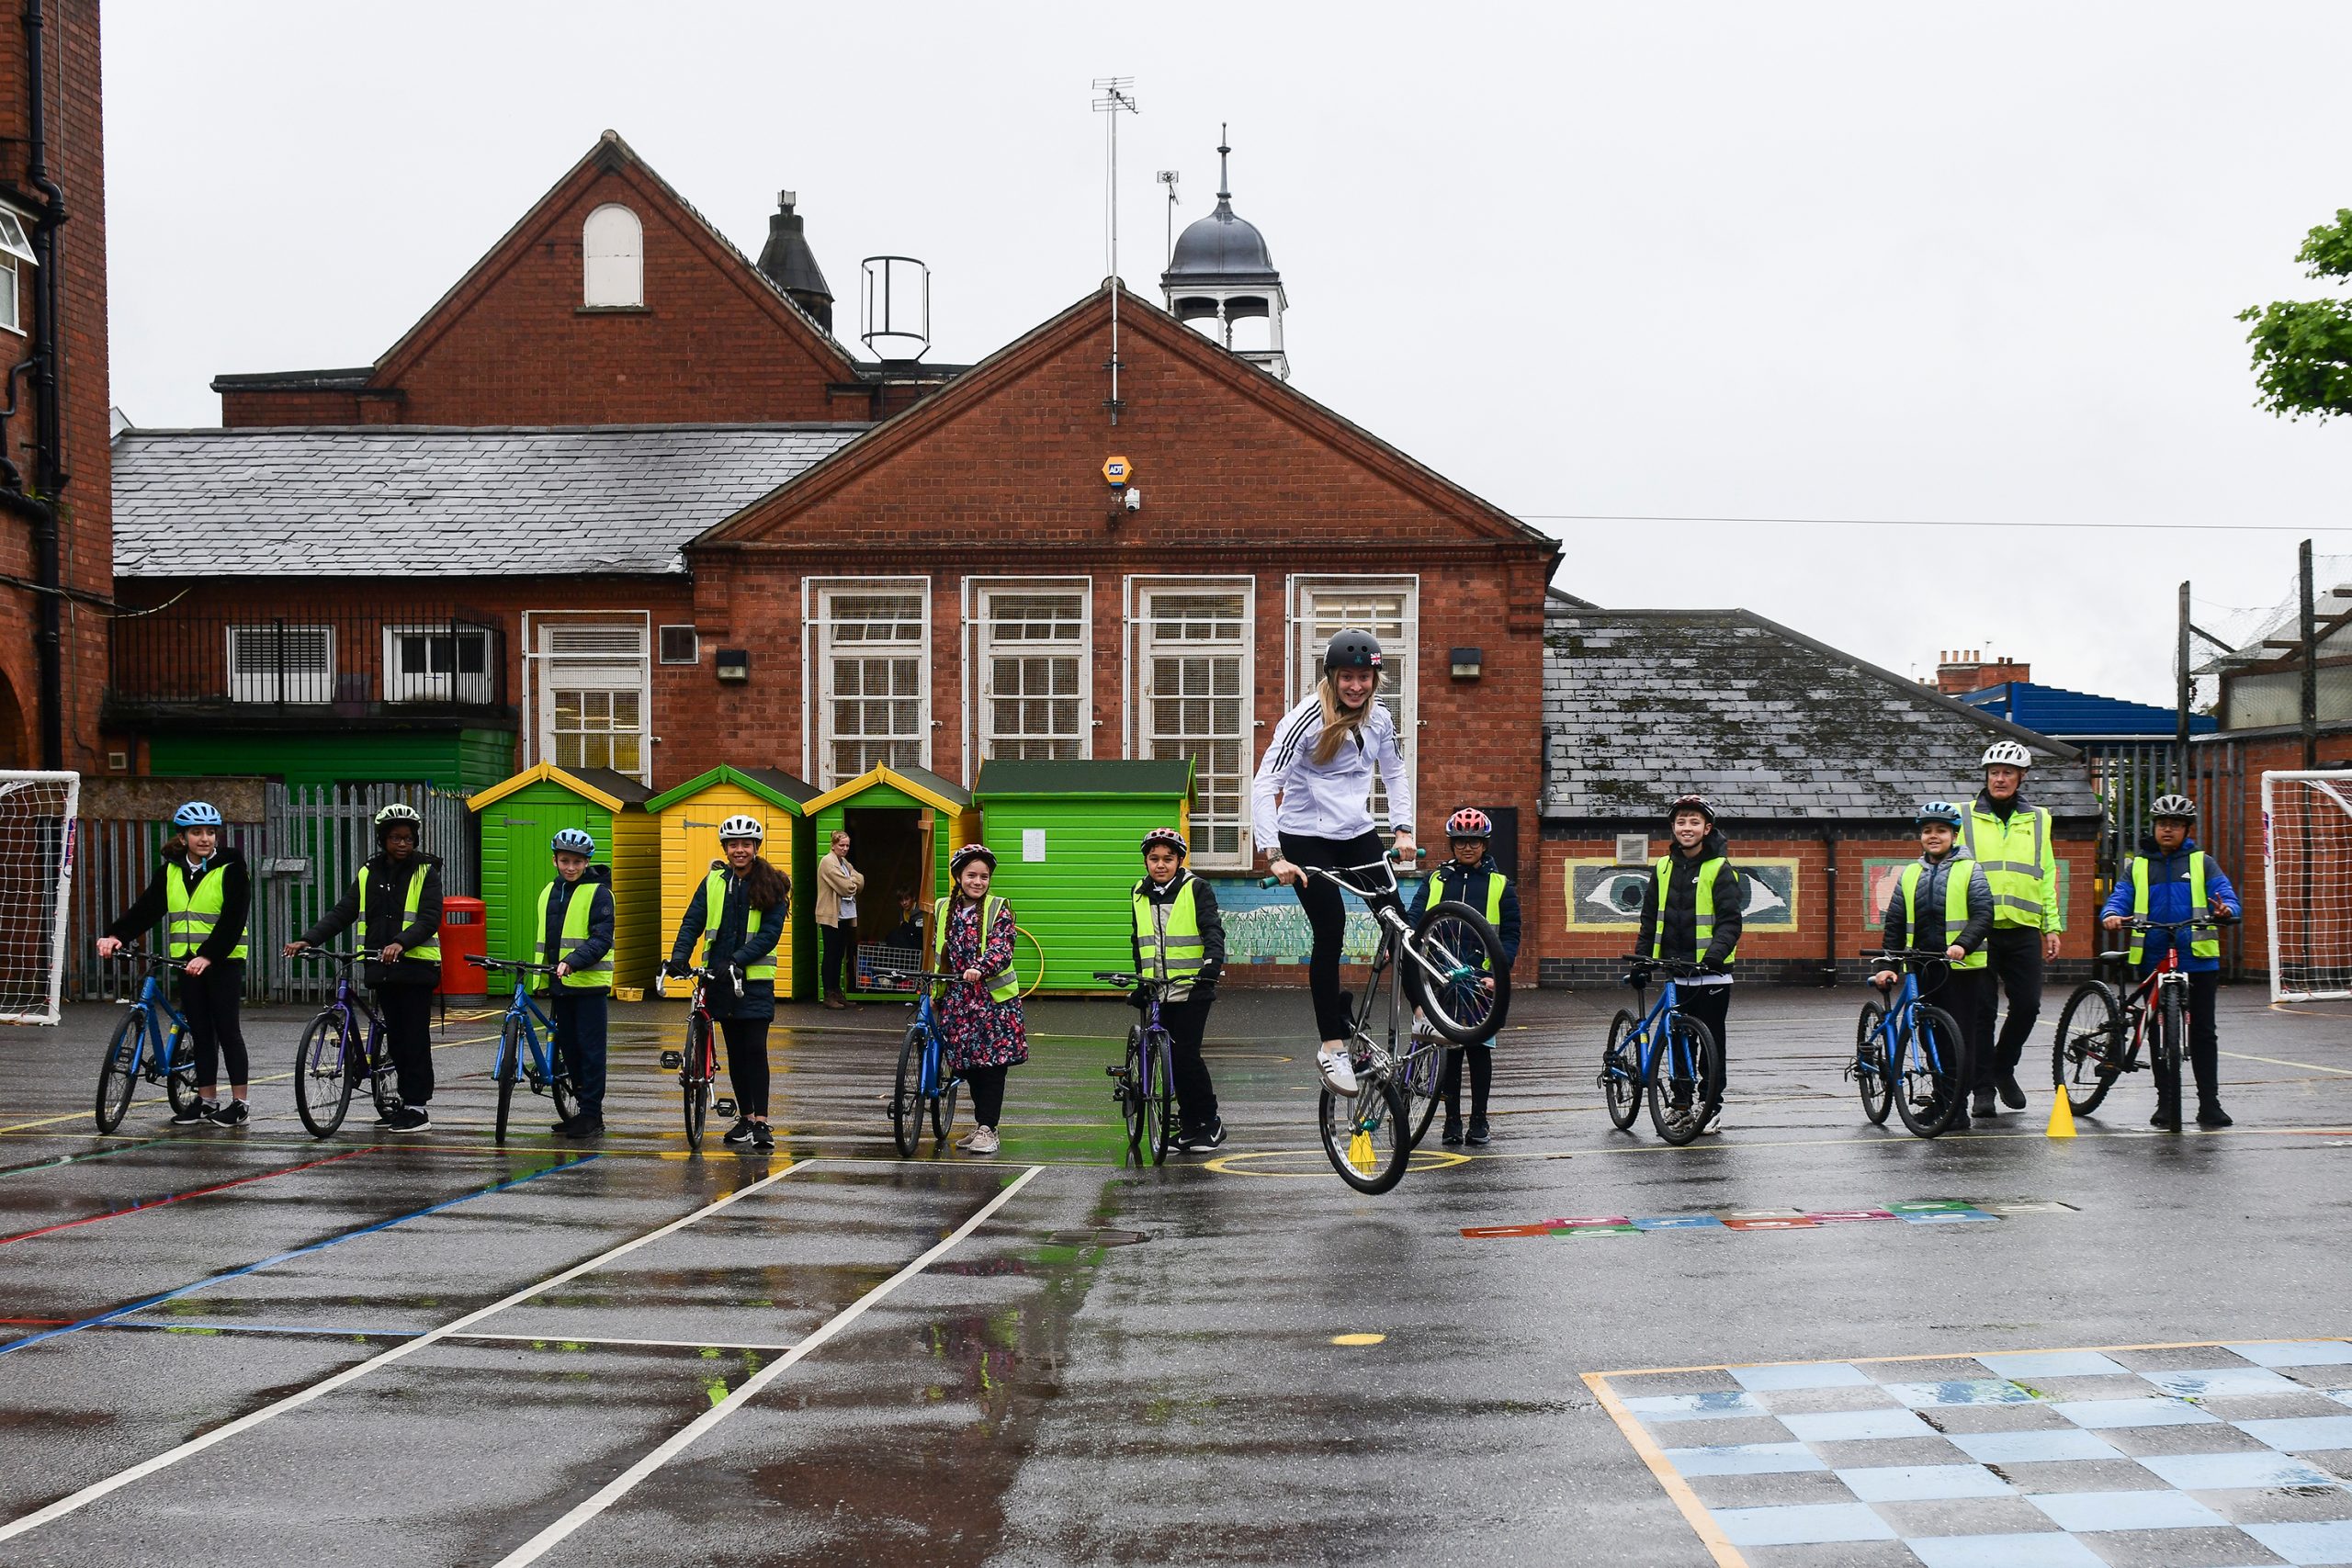 Charlotte Worthingon is performing a BMX stunt in front of a group of school children, standing on a school playground. She is pictured in mid-air, with the group standing behind her smiling in admiration.